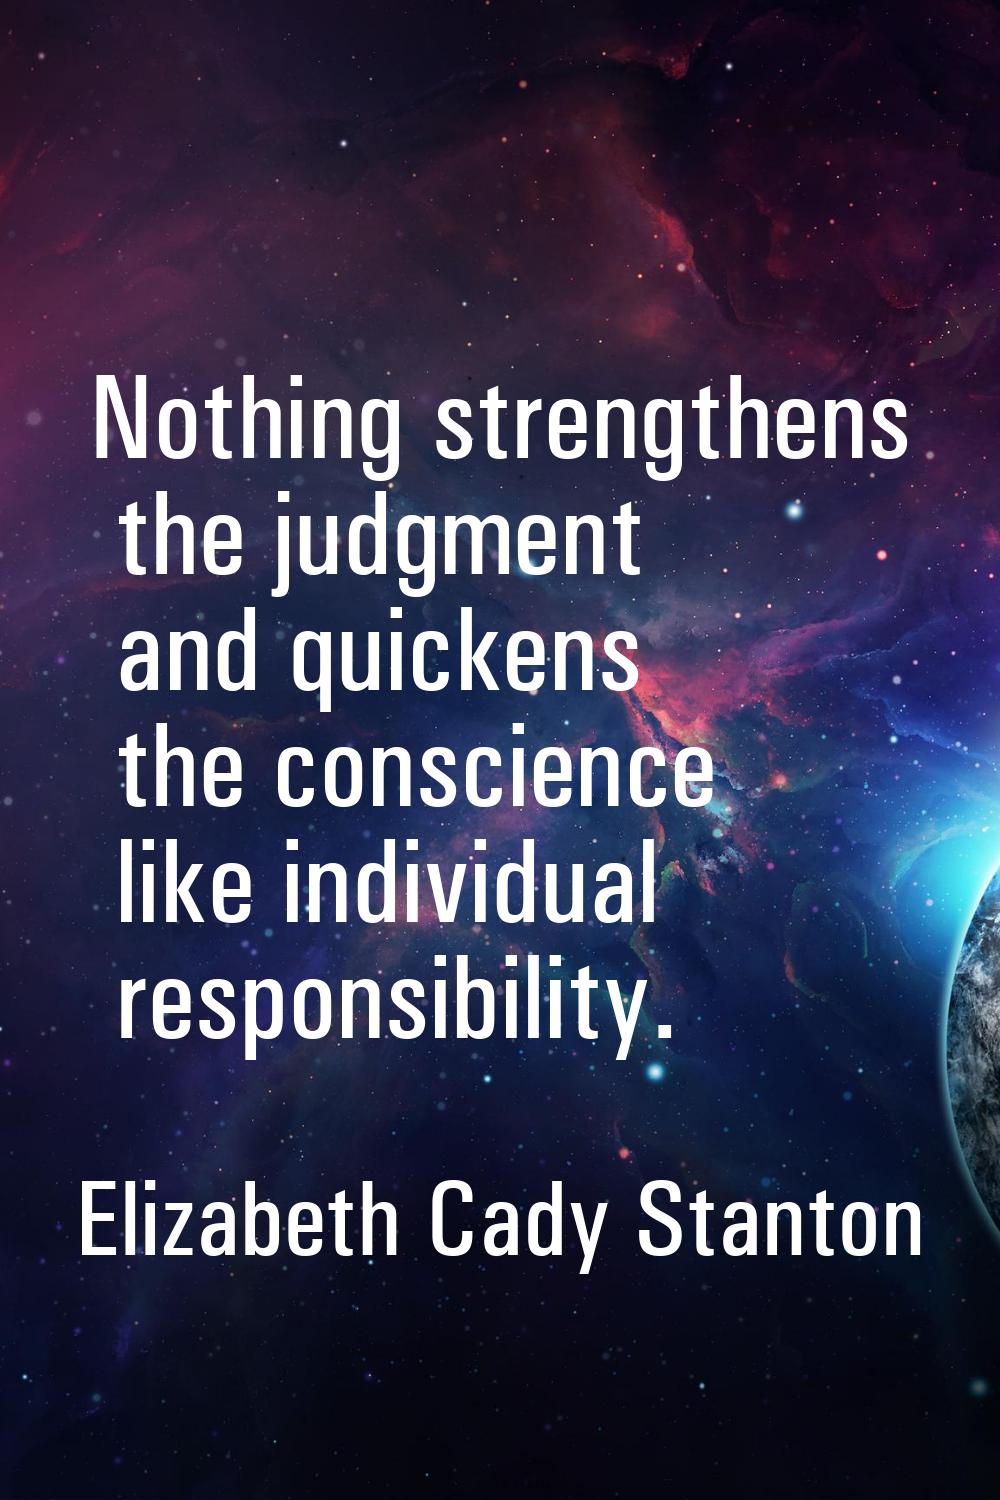 Nothing strengthens the judgment and quickens the conscience like individual responsibility.